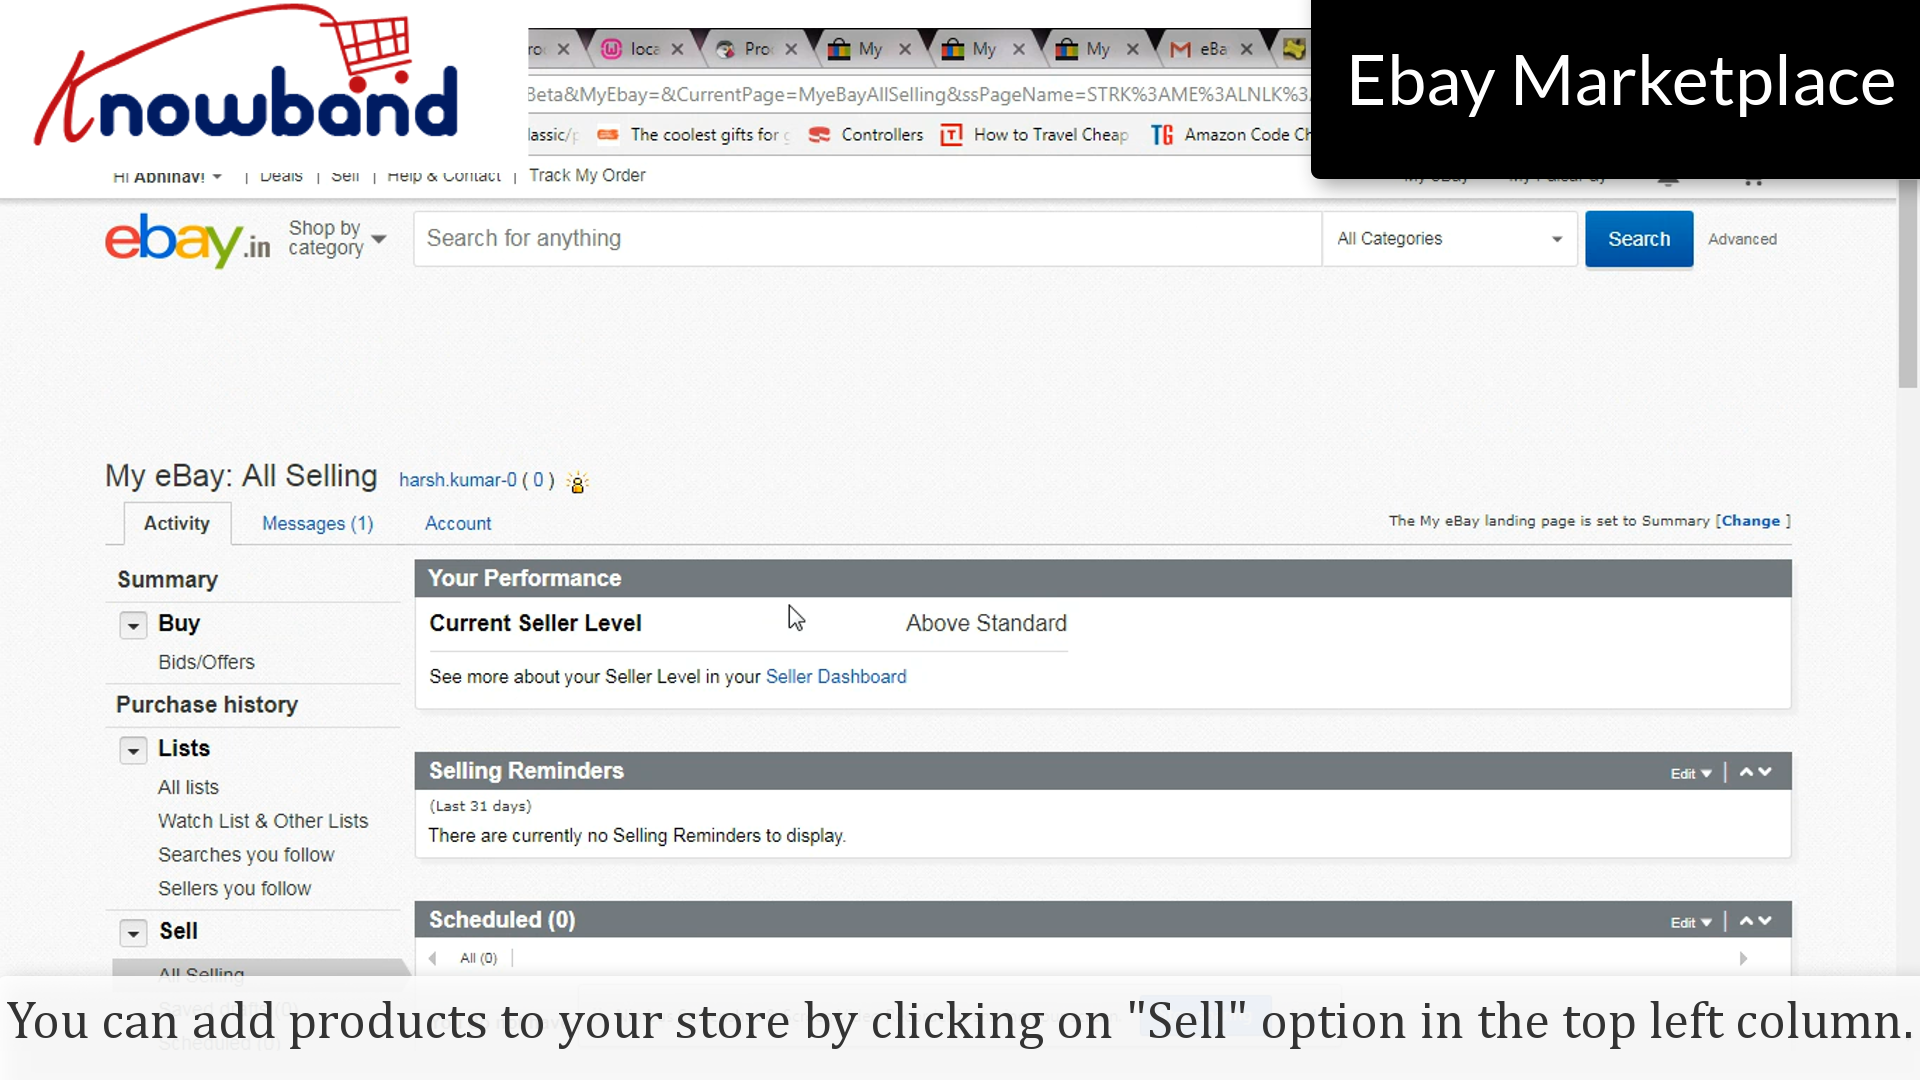 How to create Seller Account in eBay Marketplace?